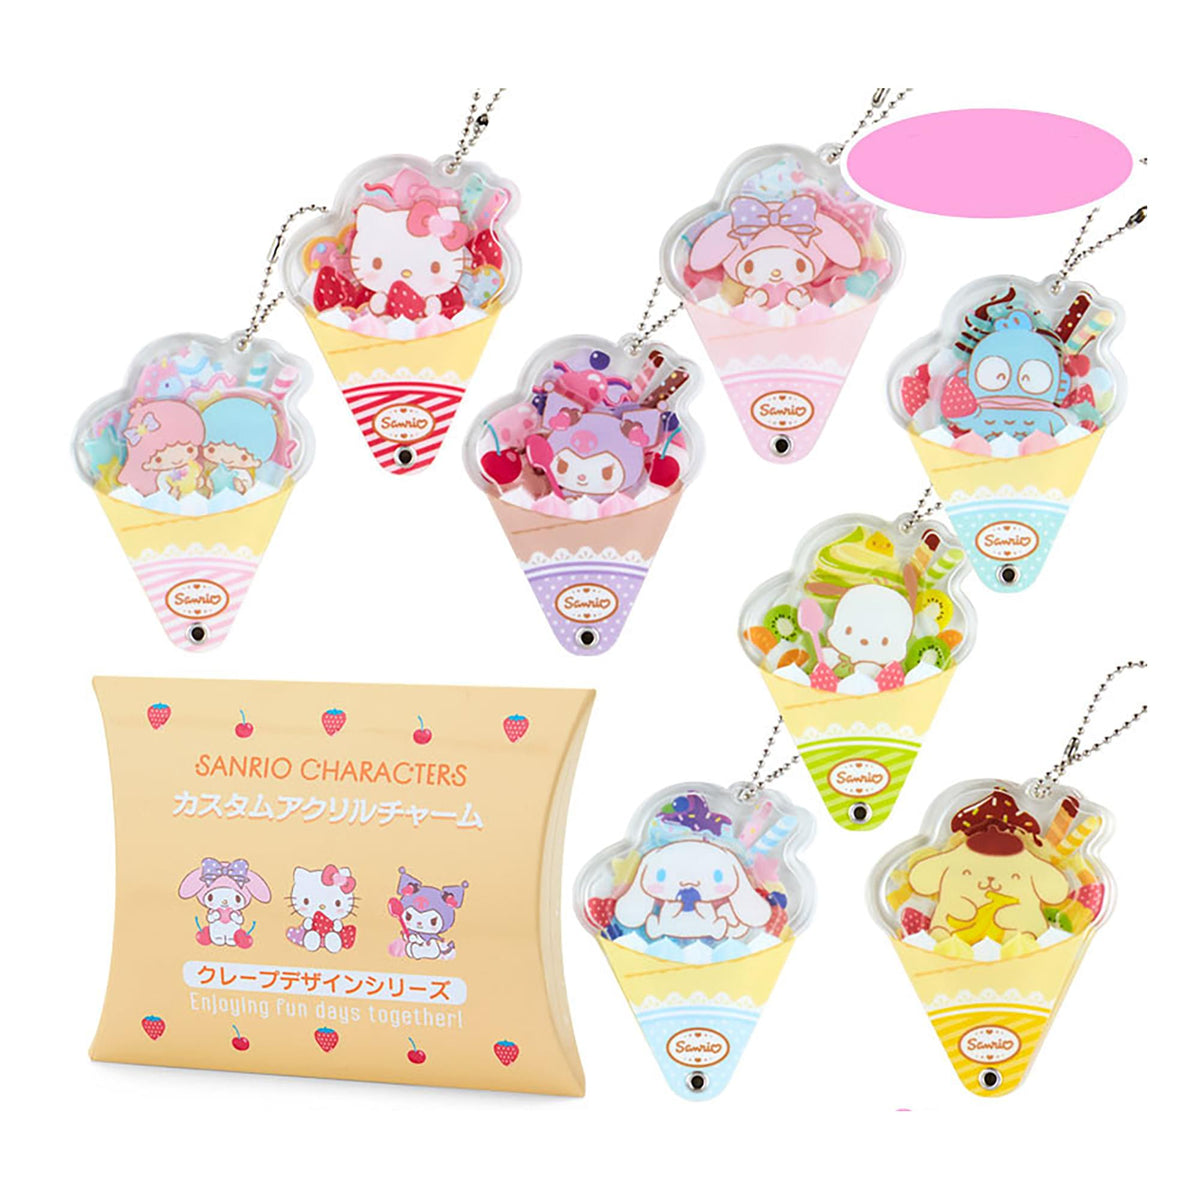 Sanrio icecream charms · Pinkstarcharms · Online Store Powered by